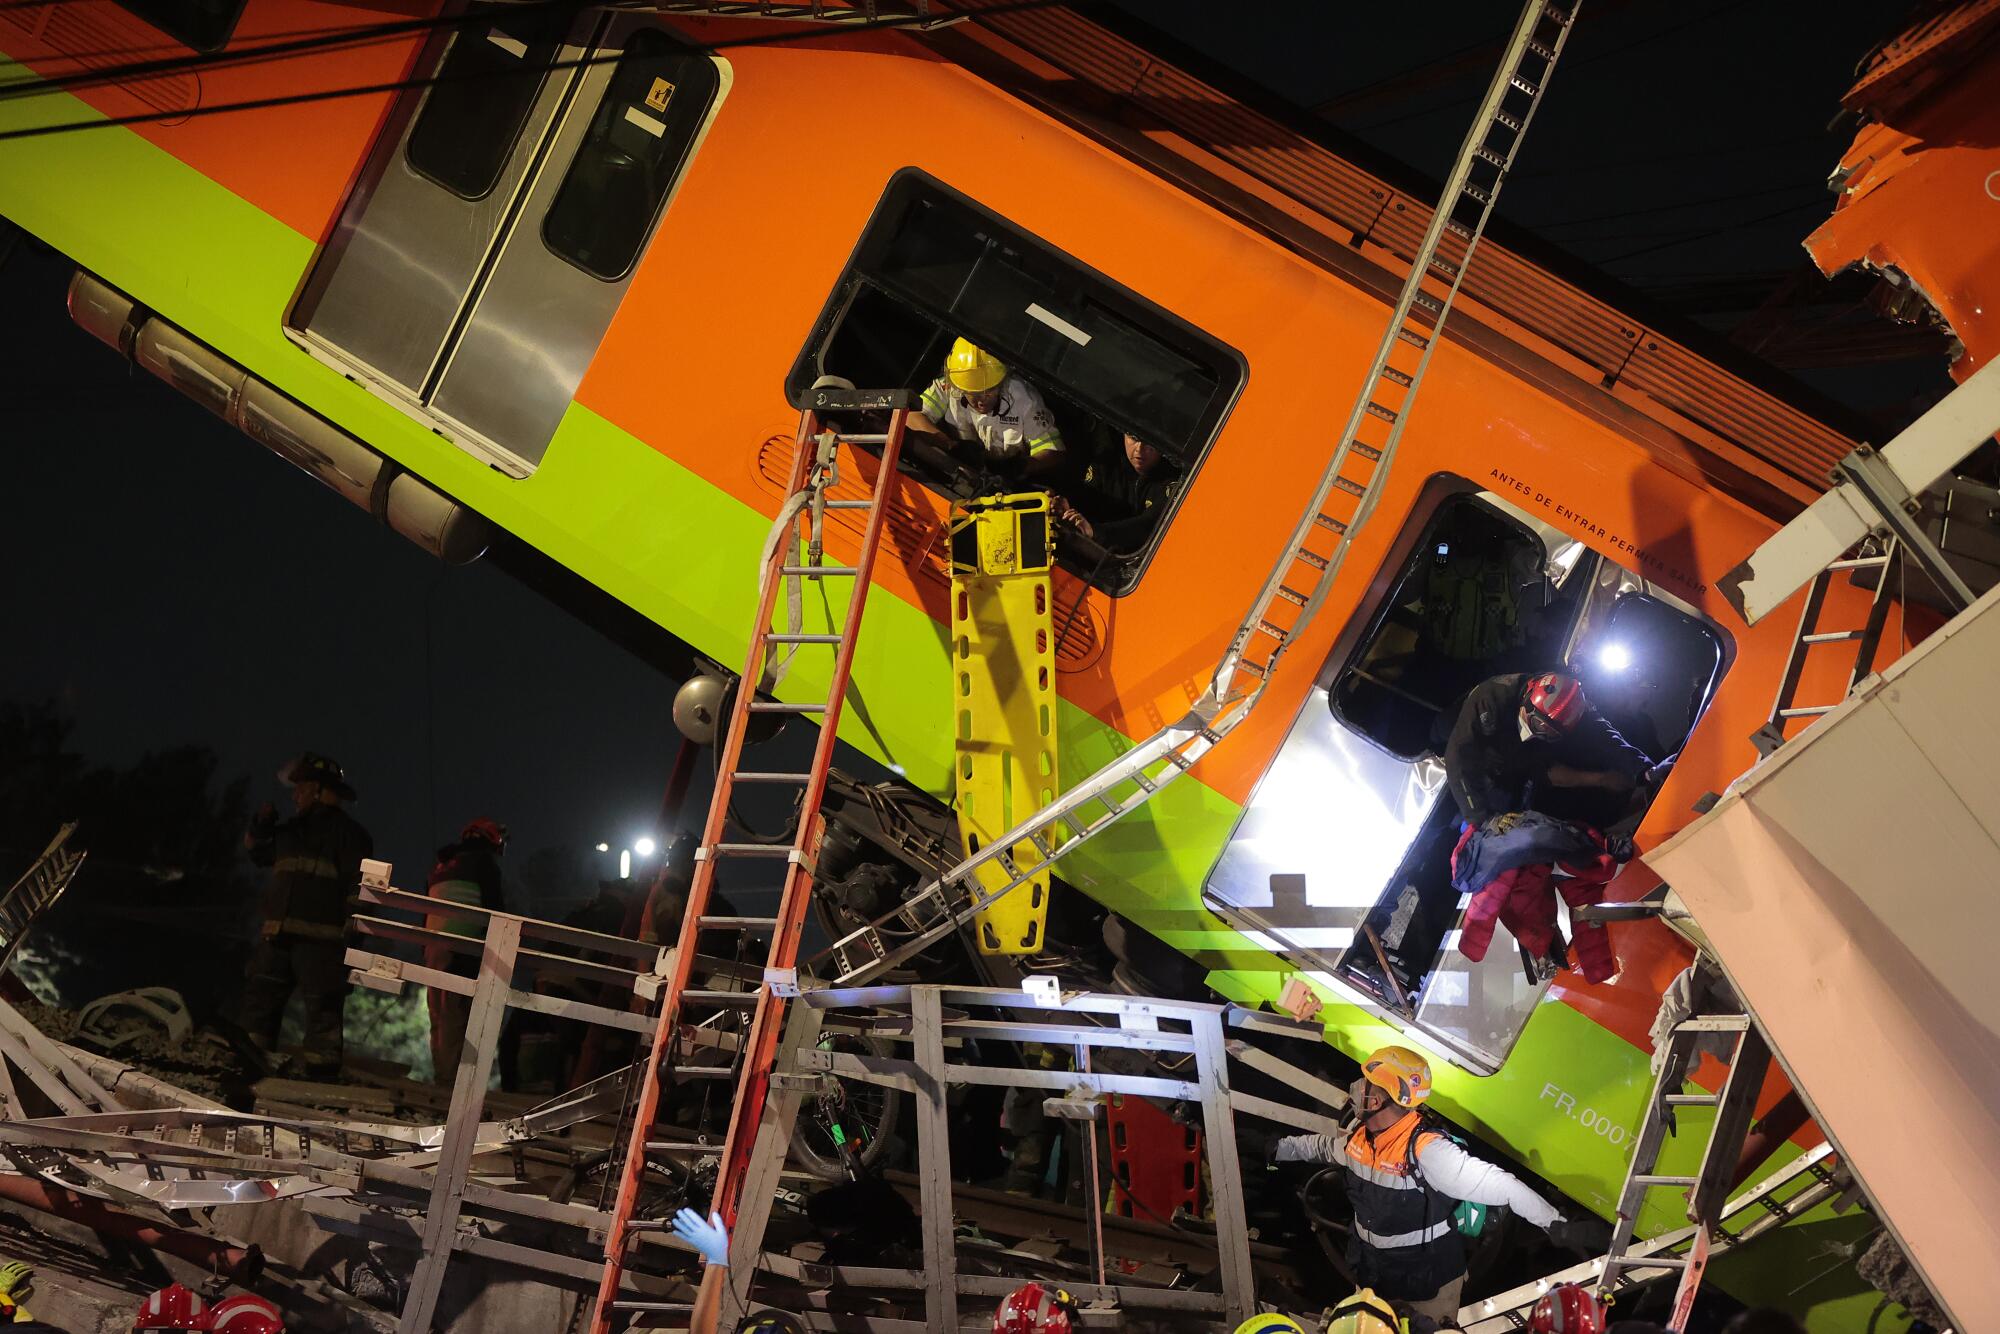 Emergency personnel search for accident survivors in a tilted subway car at night.